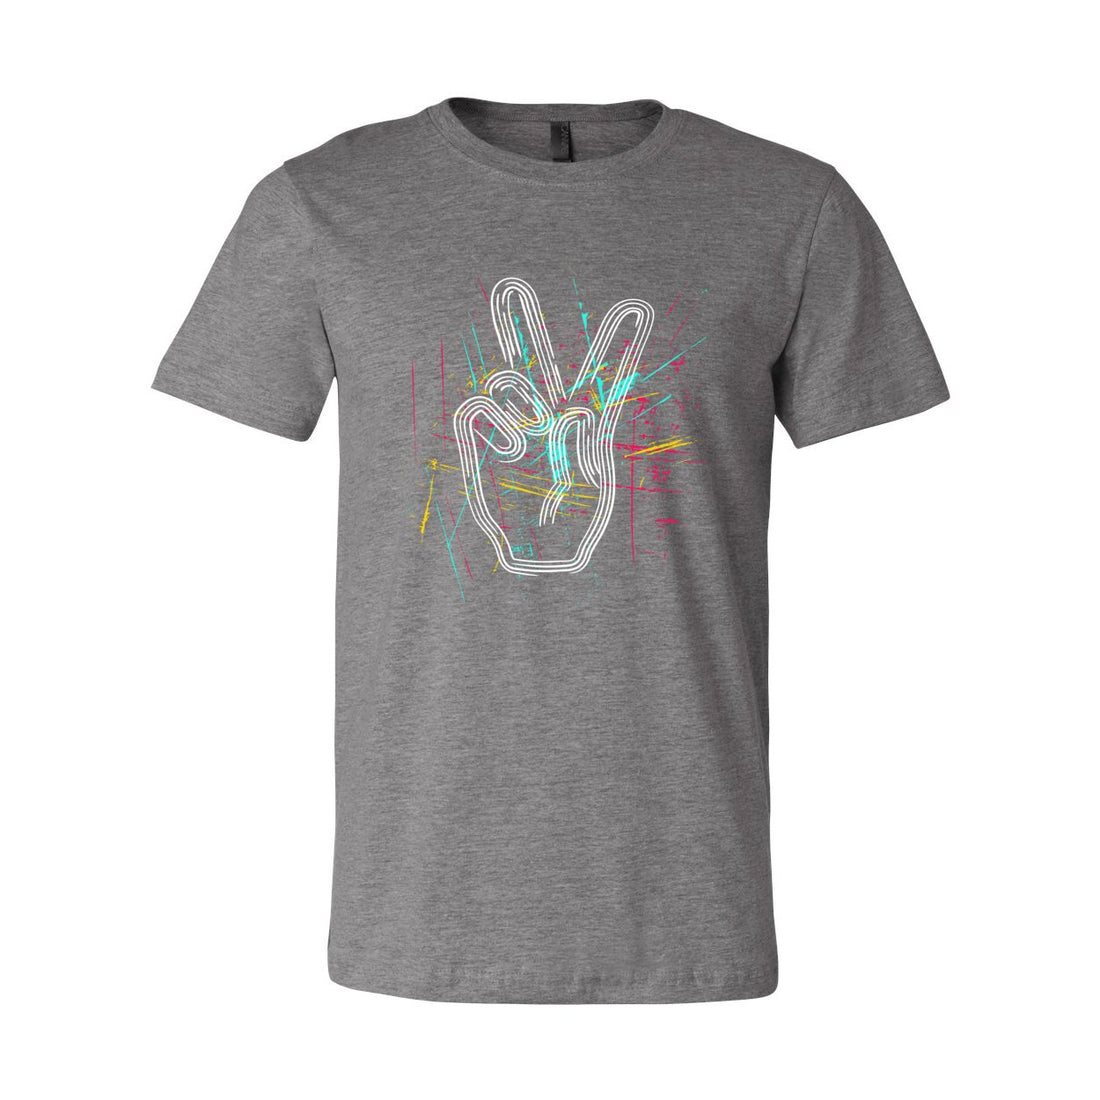 Paint Peace Jersey Tee - T - Shirts - Positively Sassy - Paint Peace Jersey Tee